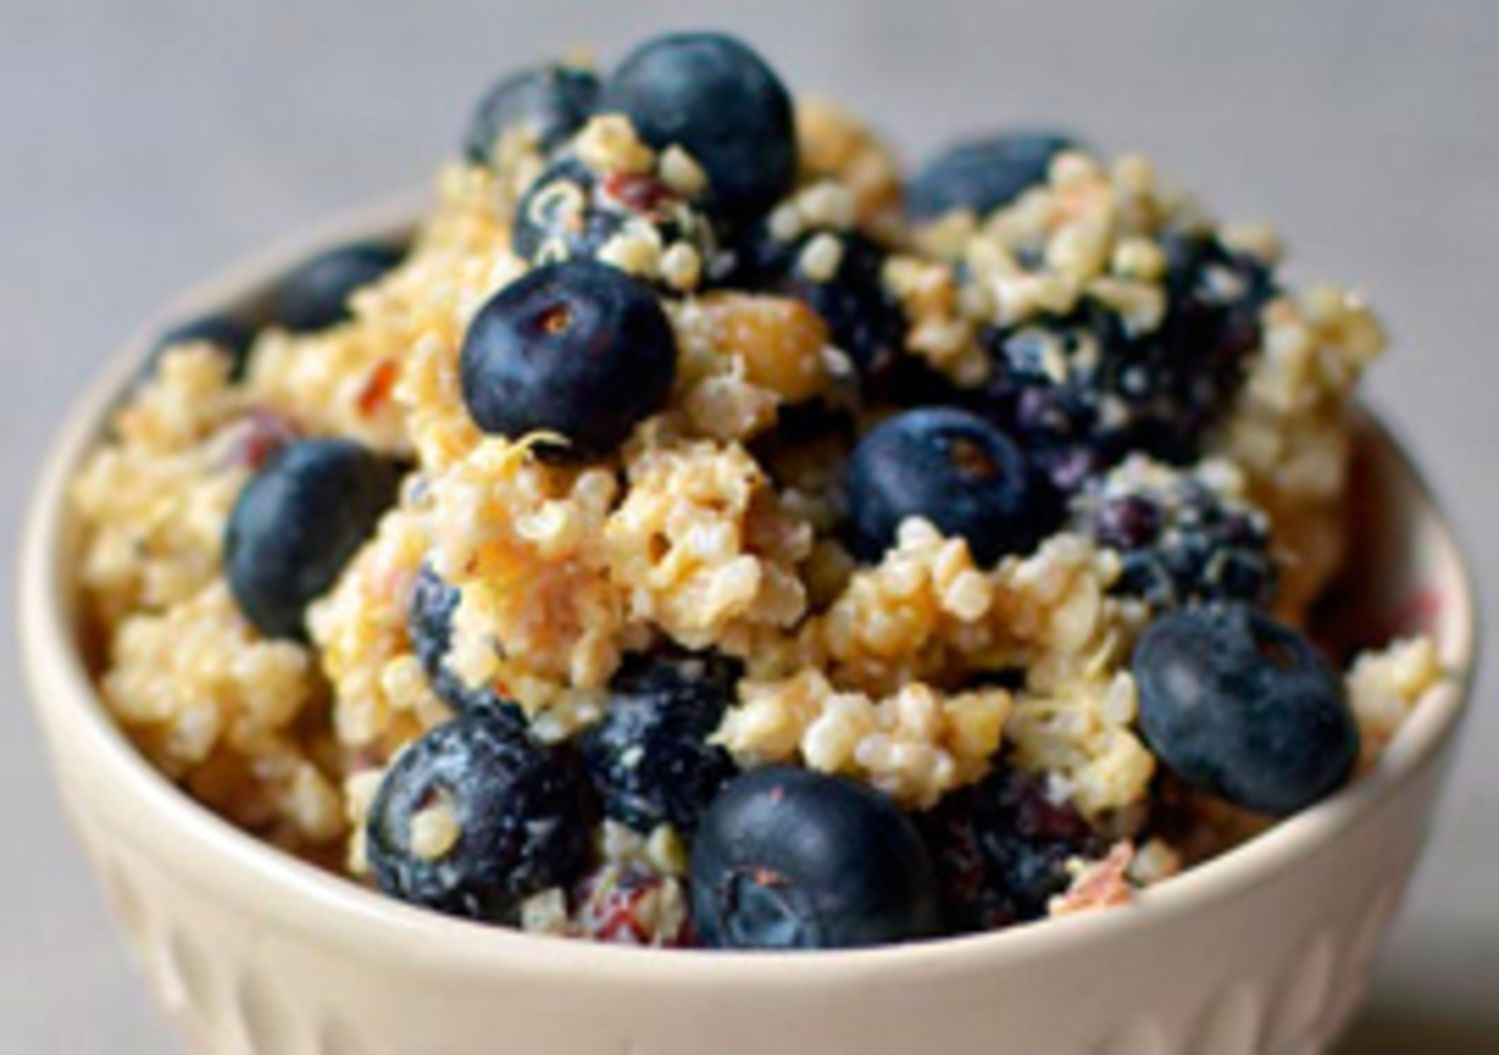 Ideas for Protein-Rich Breakfasts Without Eggs? | Kitchn